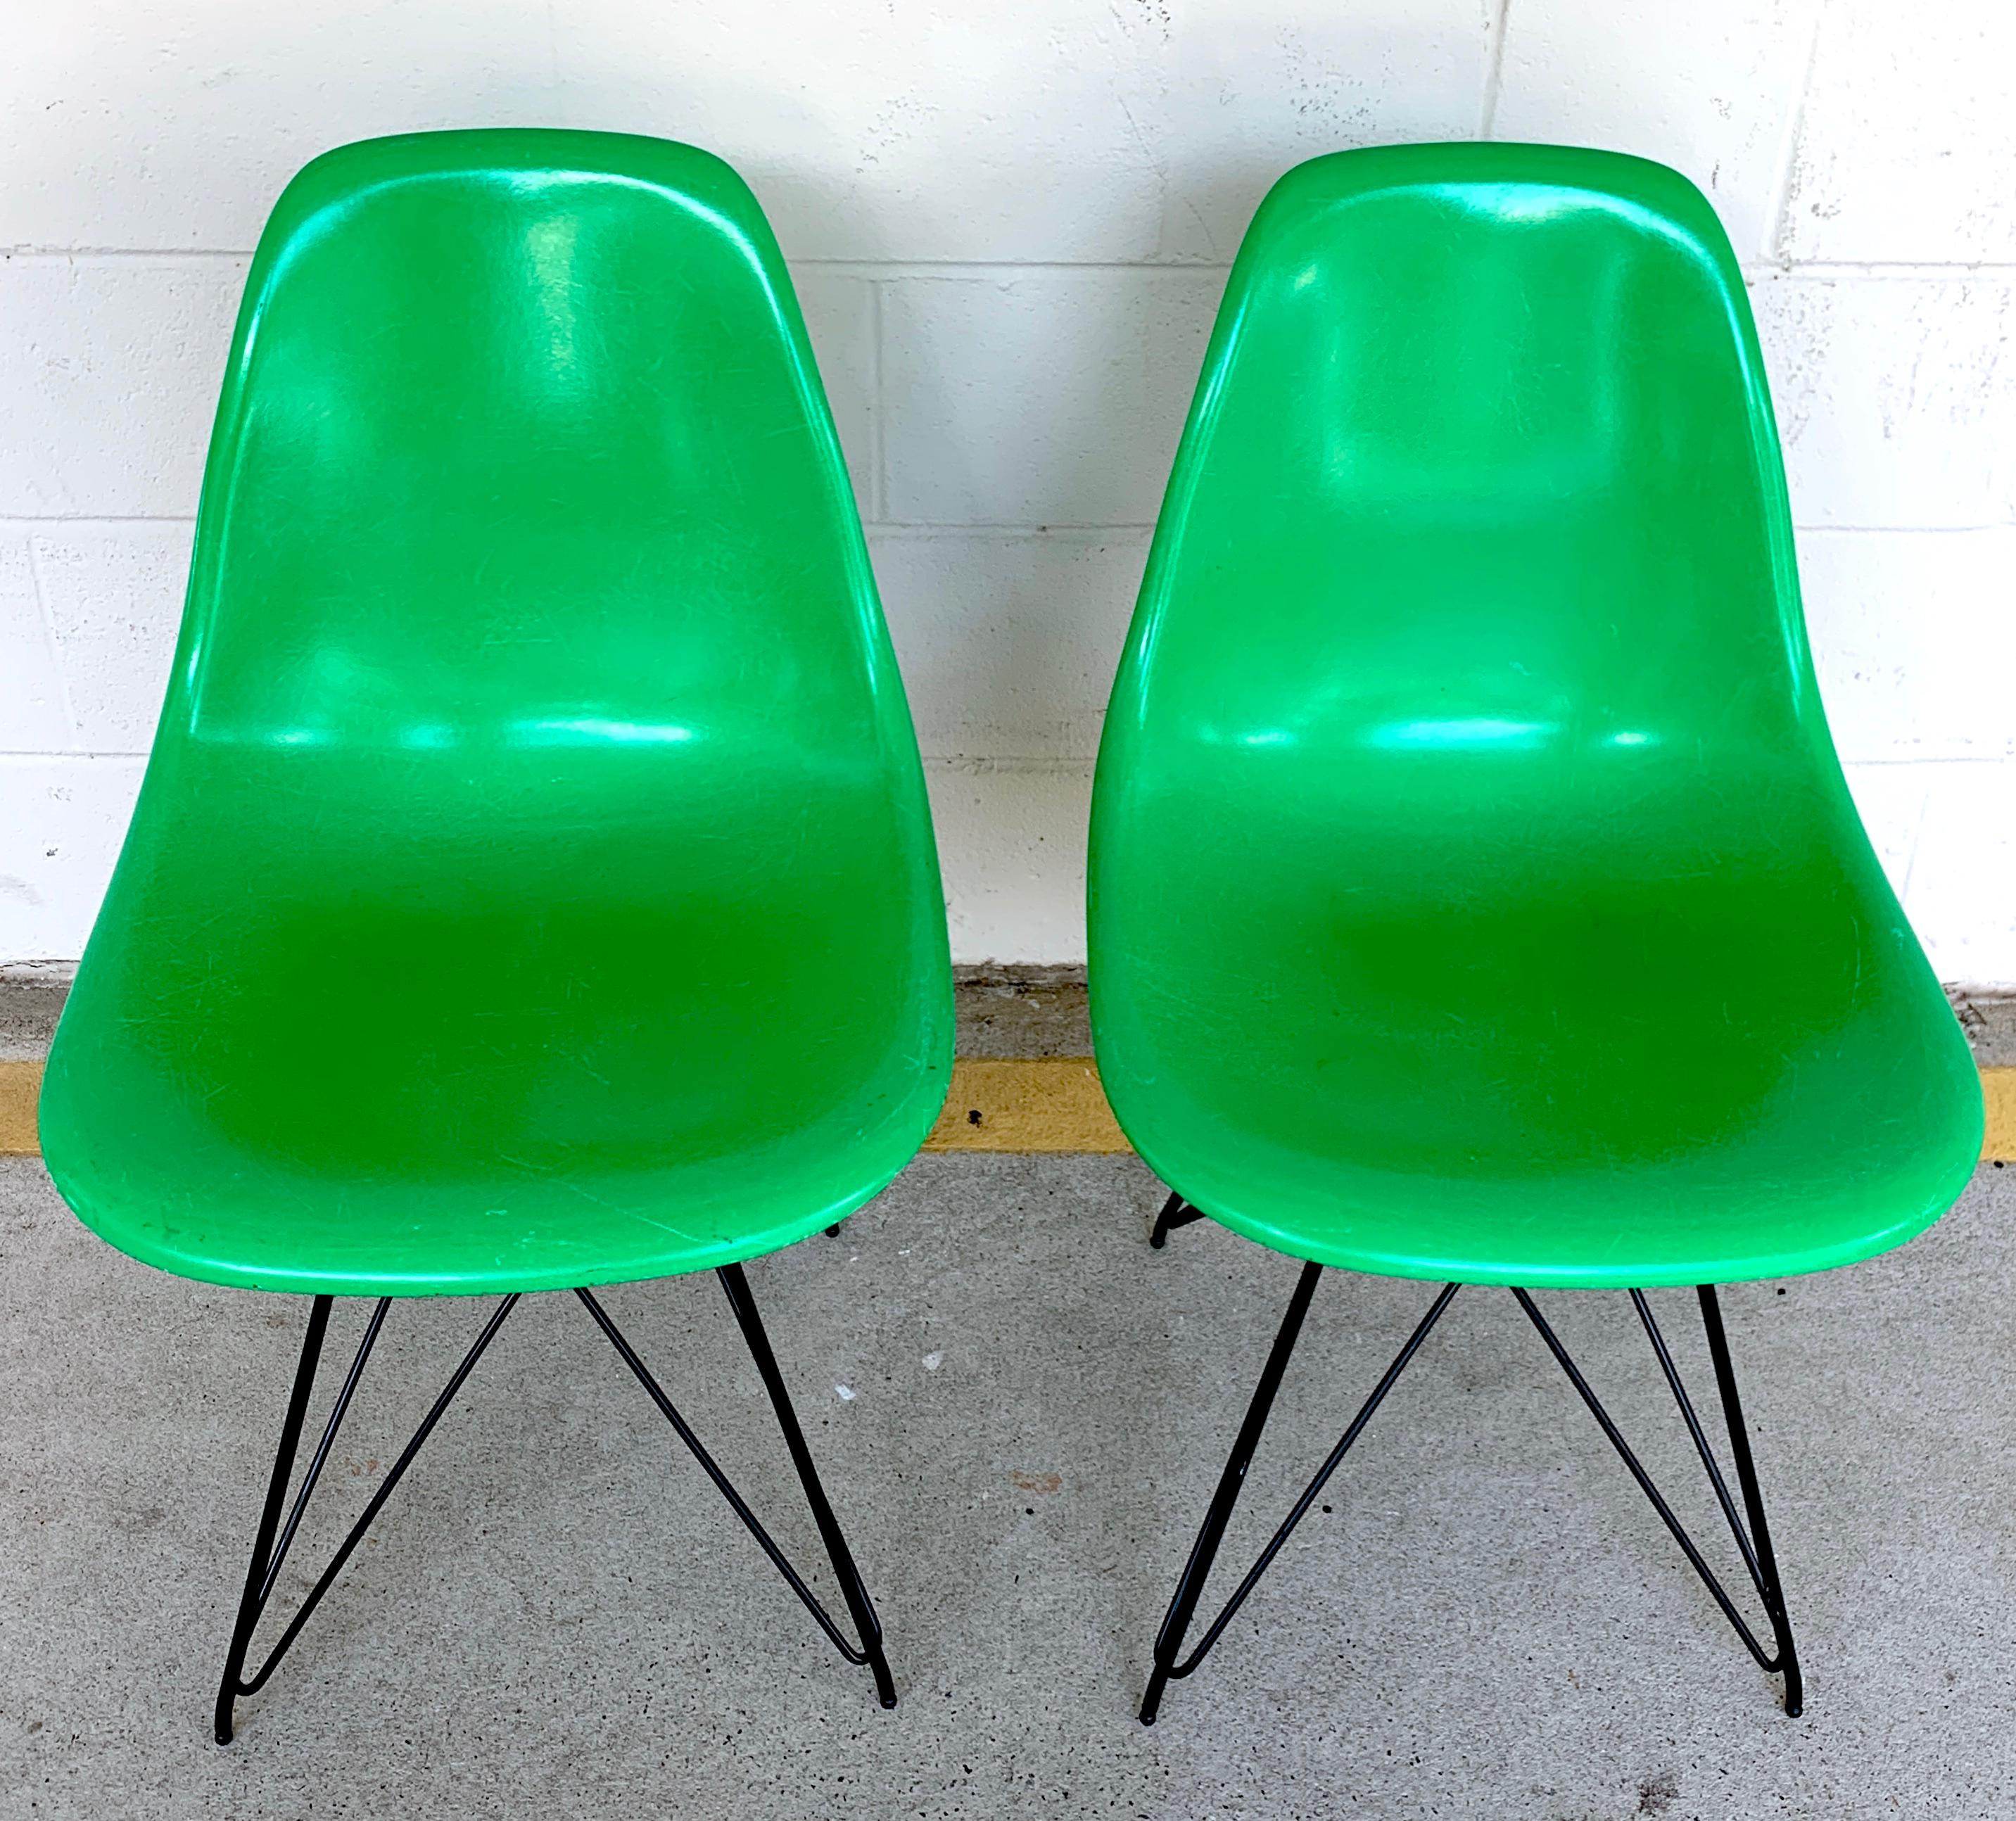 Pair of Herman Miller Eames Eiffel Tower green shell chairs, a great pair in good vintage condition, in a discontinued color. 
Herman Miller chairs 31 H x18.5 W x 16 D, 17.5 SH
18.5